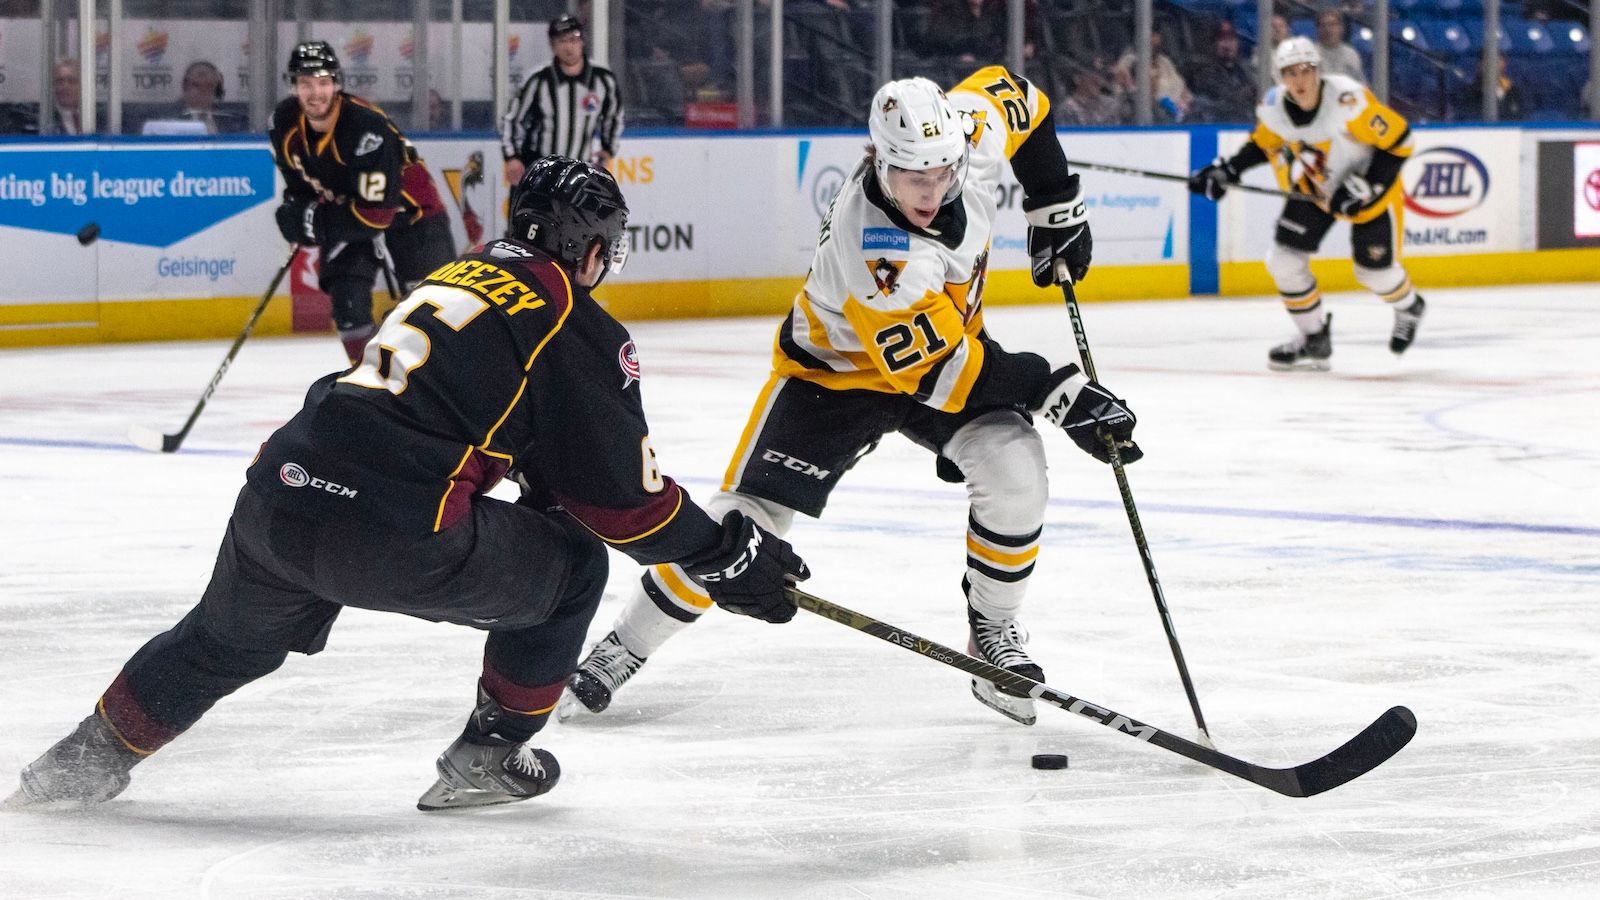 Two AHL teams are going to face off in an incredible Teenage